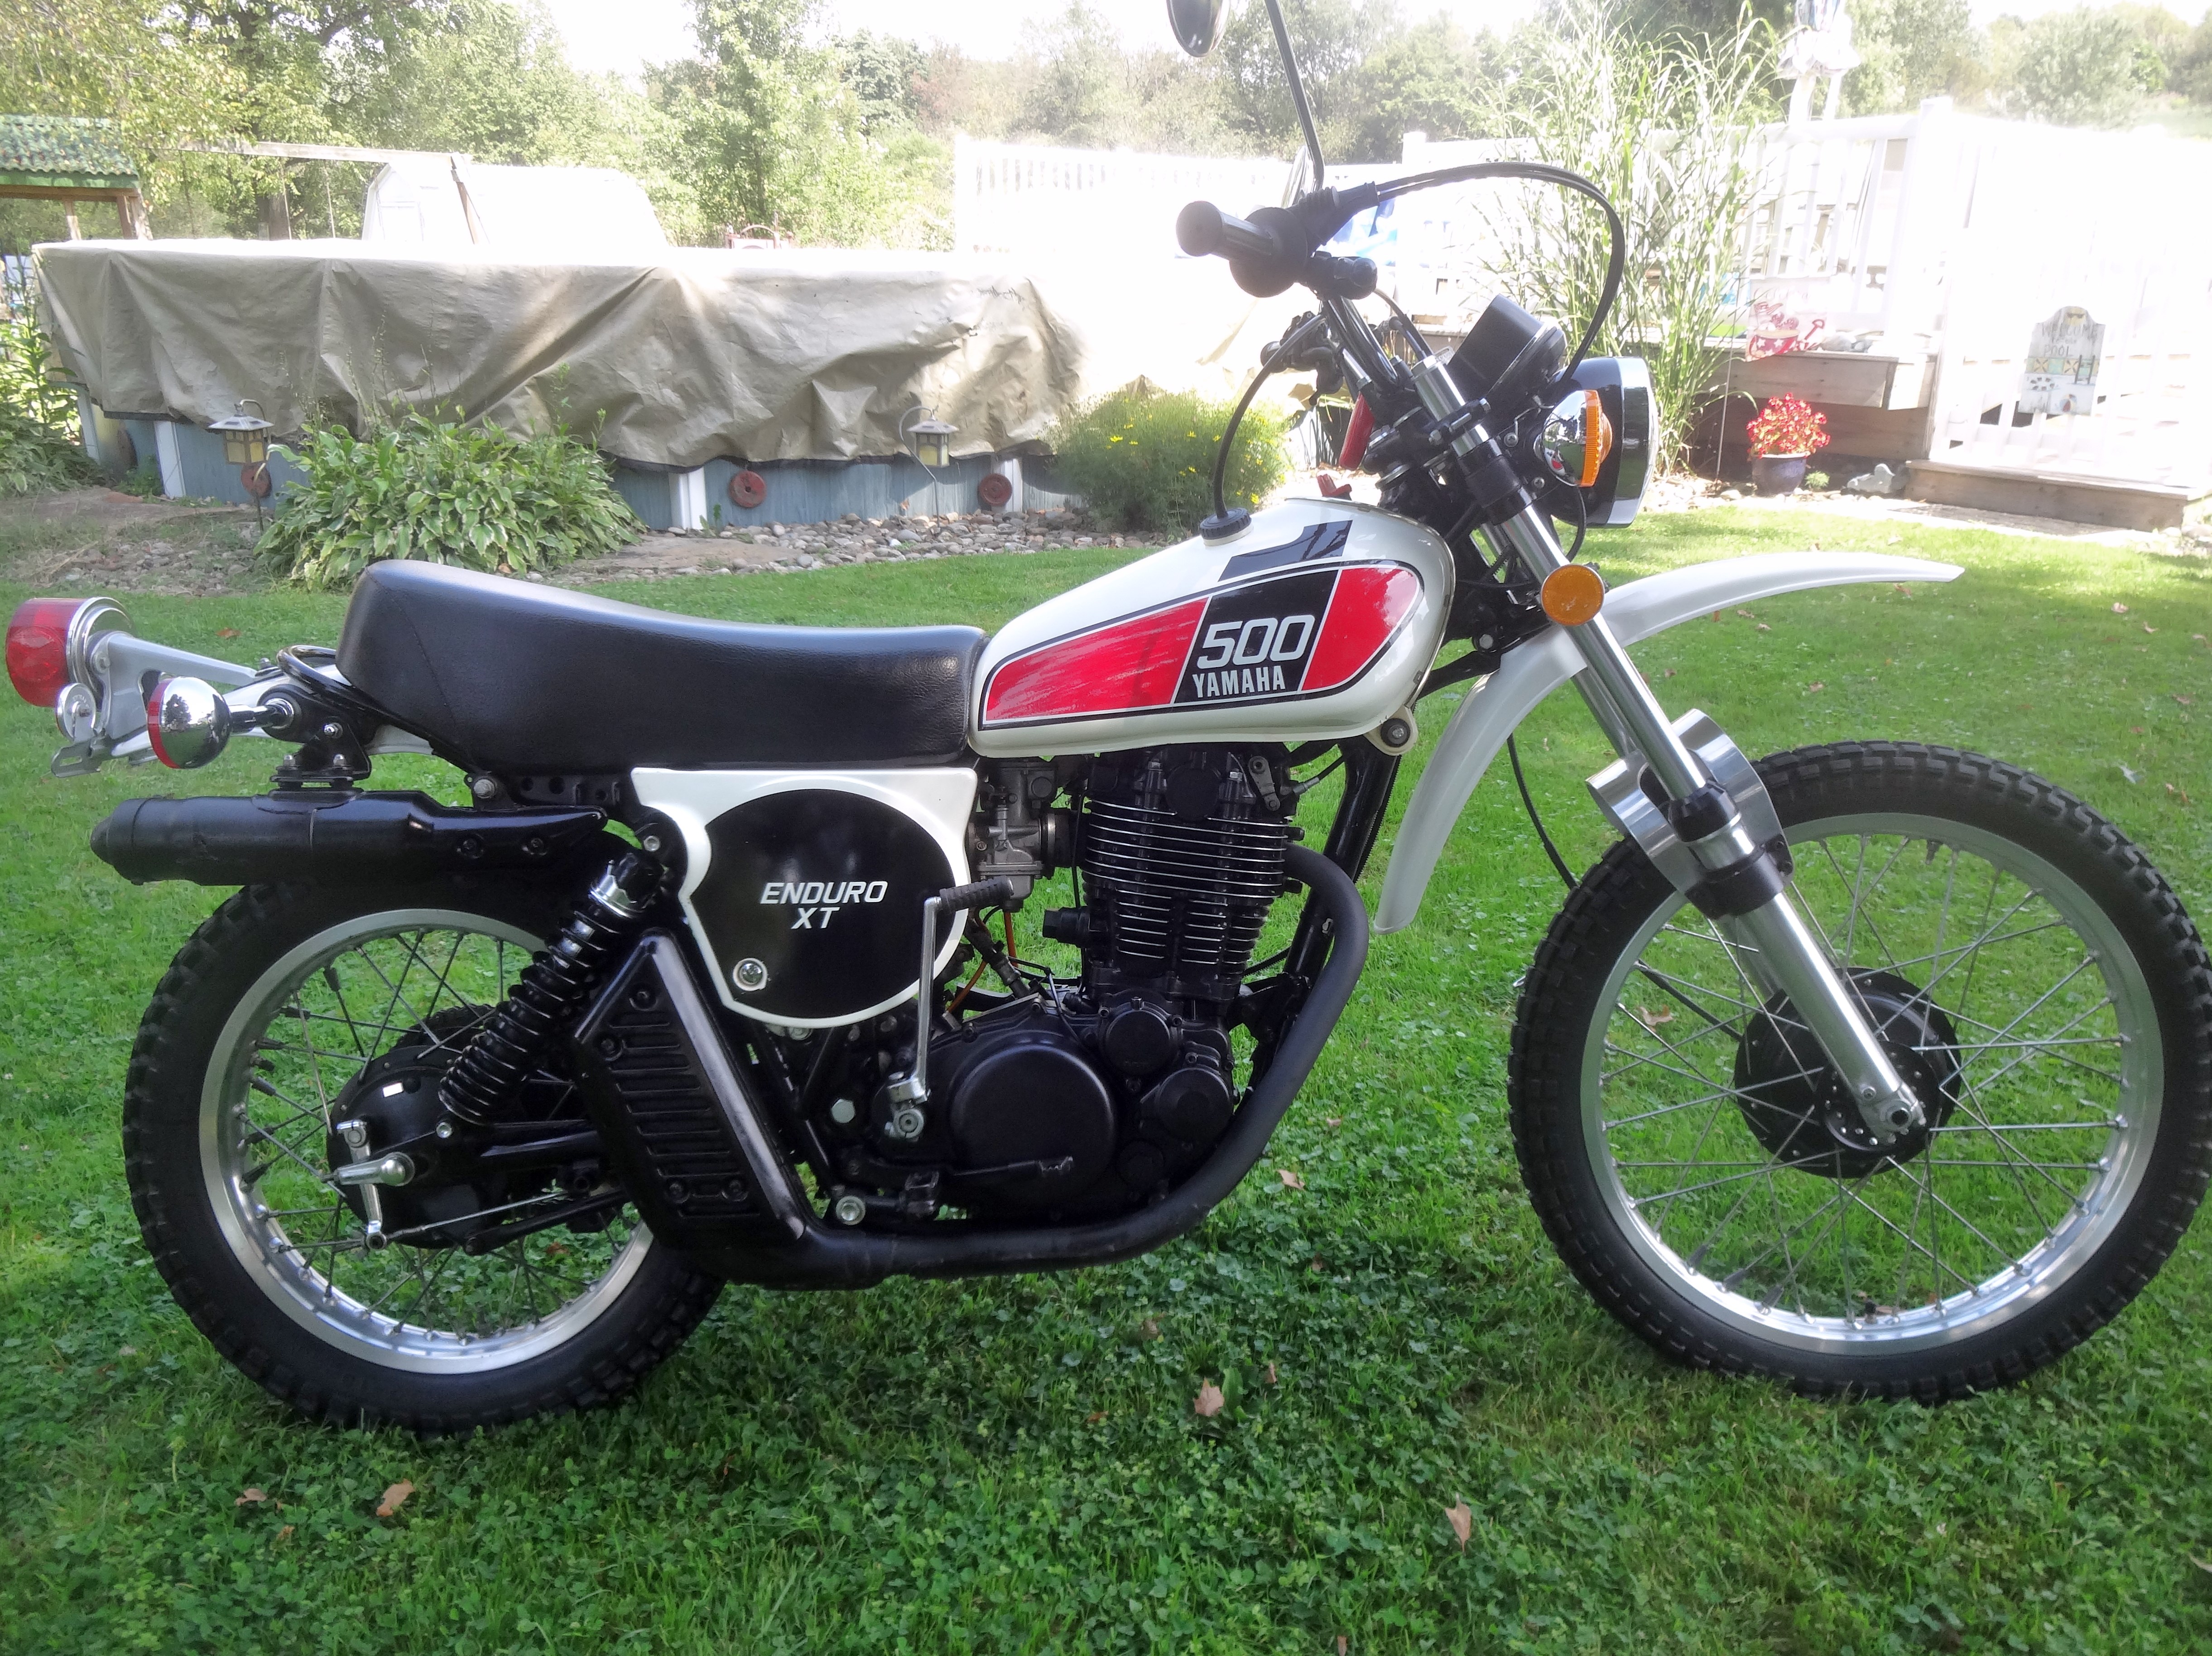 Craigslist Akron Canton Motorcycles By Owner | Reviewmotors.co